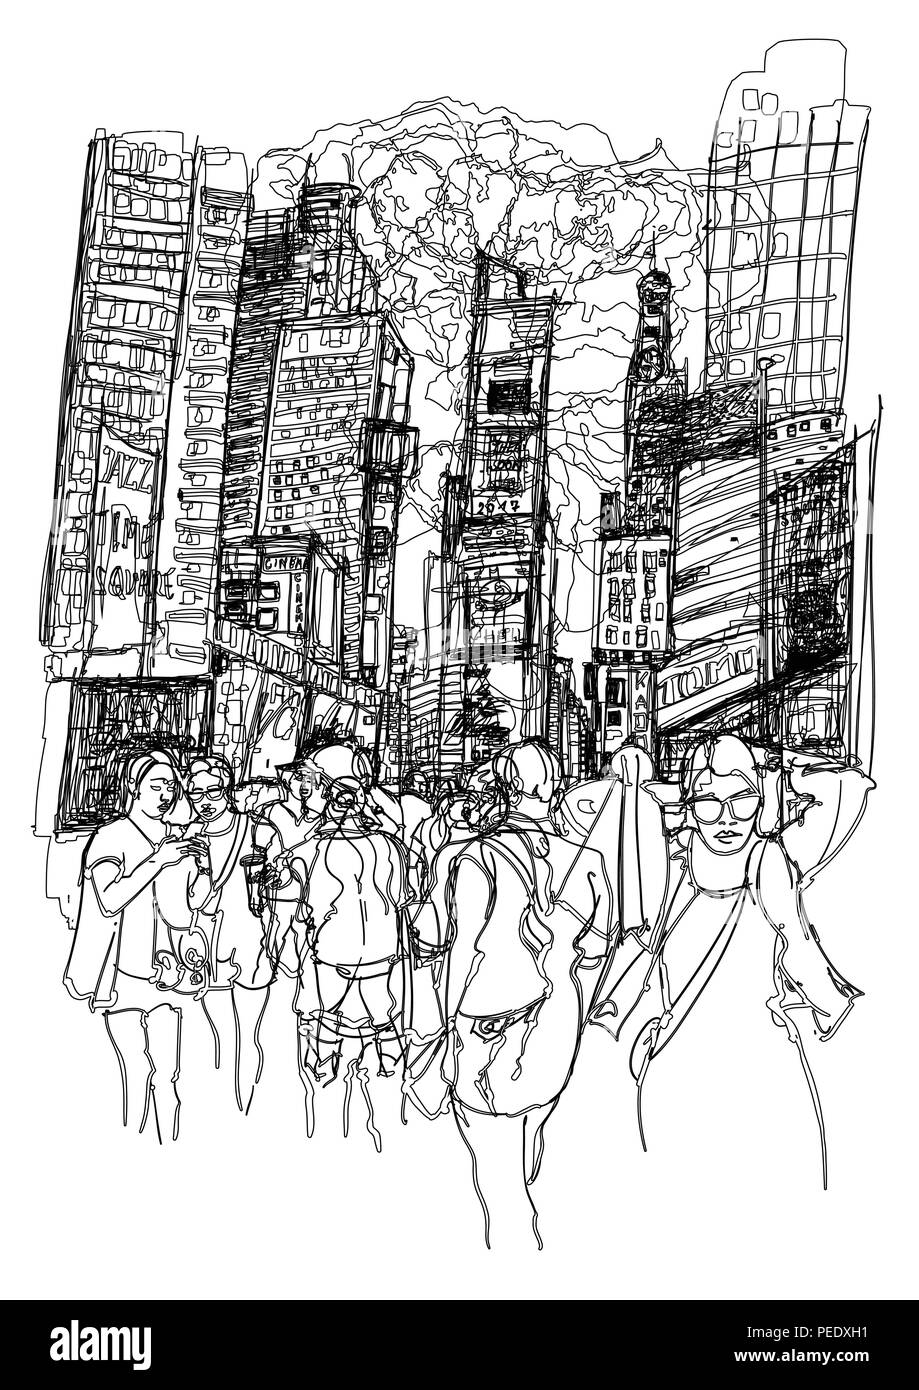 Times square in New York - people in the street - illustration Stock Vector